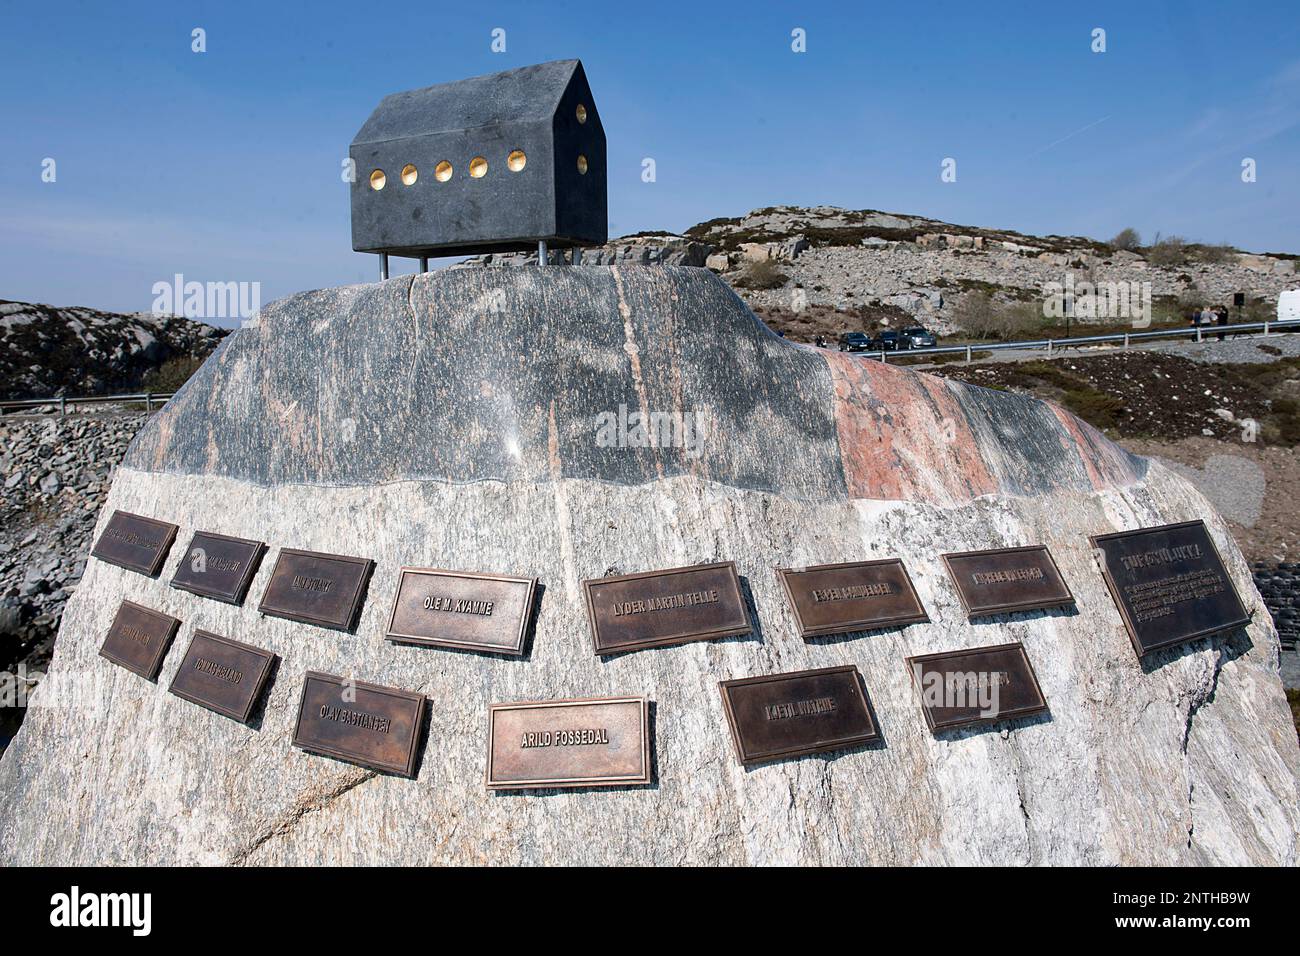 A view of the monument named Minnehuset (Memorial House) which was unveiled  in Turoy near Bergen, western Norway, Monday, April, 29, 2019. The monument  created by Arne Maeland, is in memory of